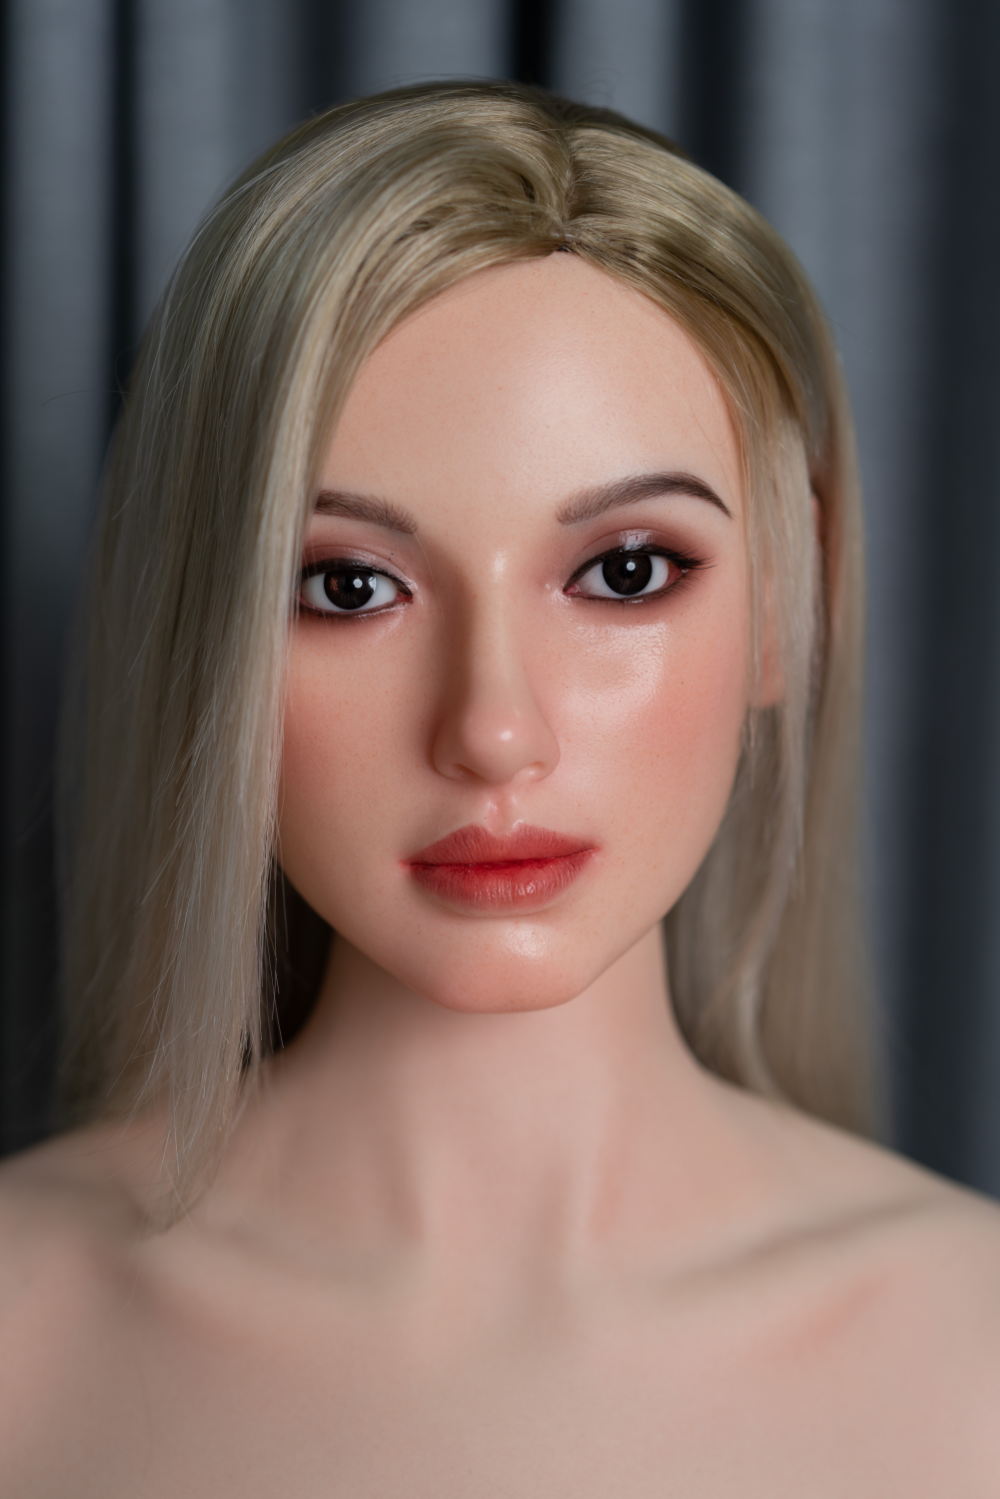 Zelex Doll 175 cm E Silicone - Sophia | Buy Sex Dolls at DOLLS ACTUALLY